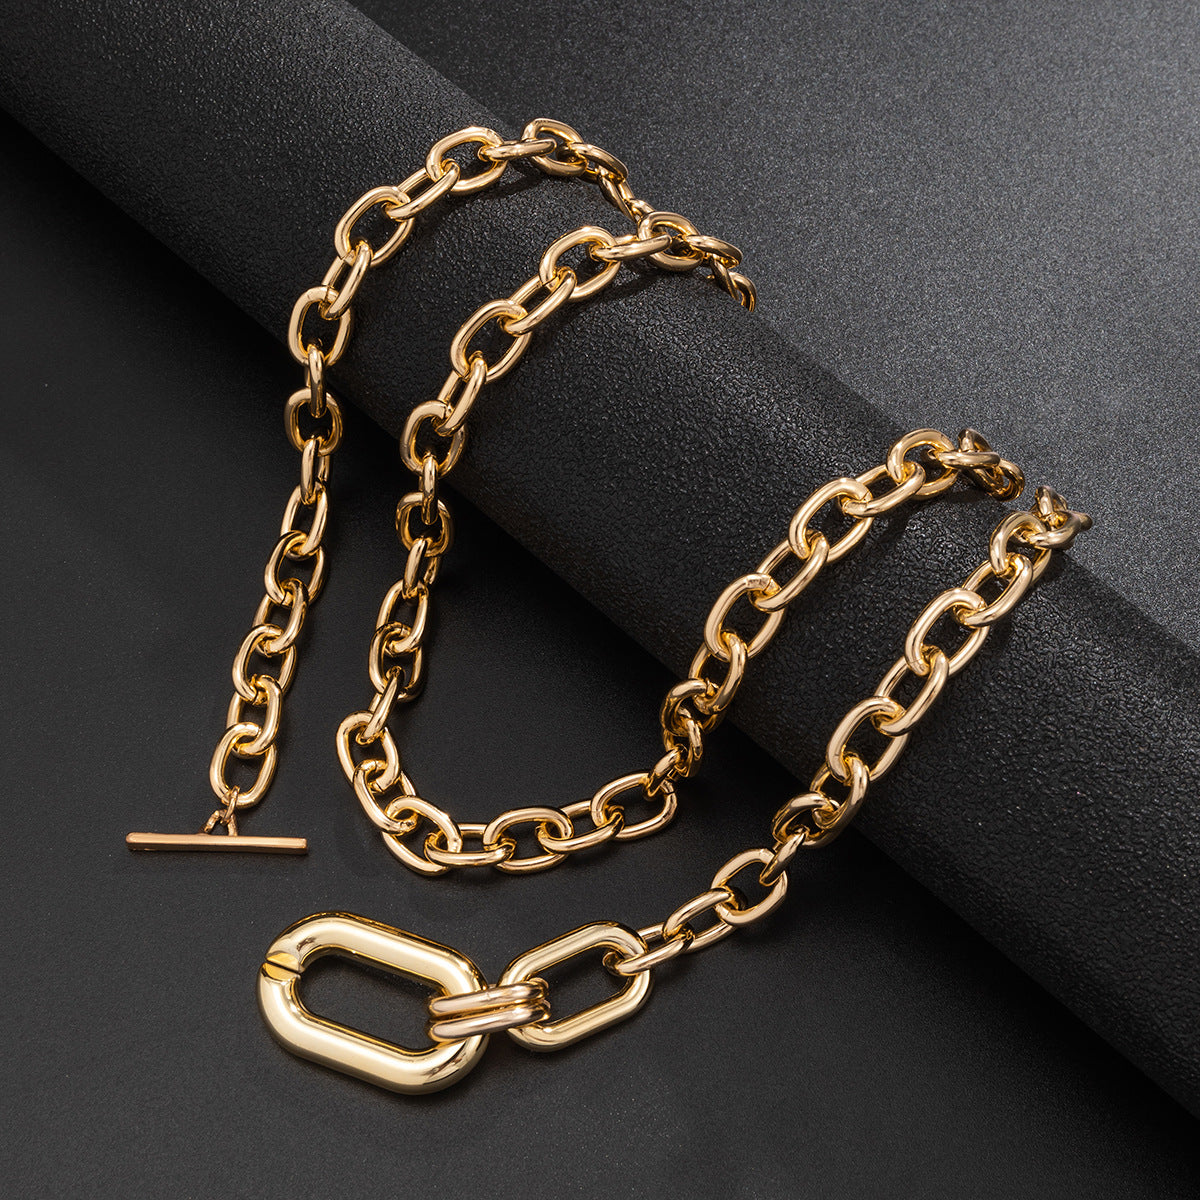 Vintage Style Geometric Solid Color Ccb Alloy Aluminum Plating Chain Women's Pendant Necklace